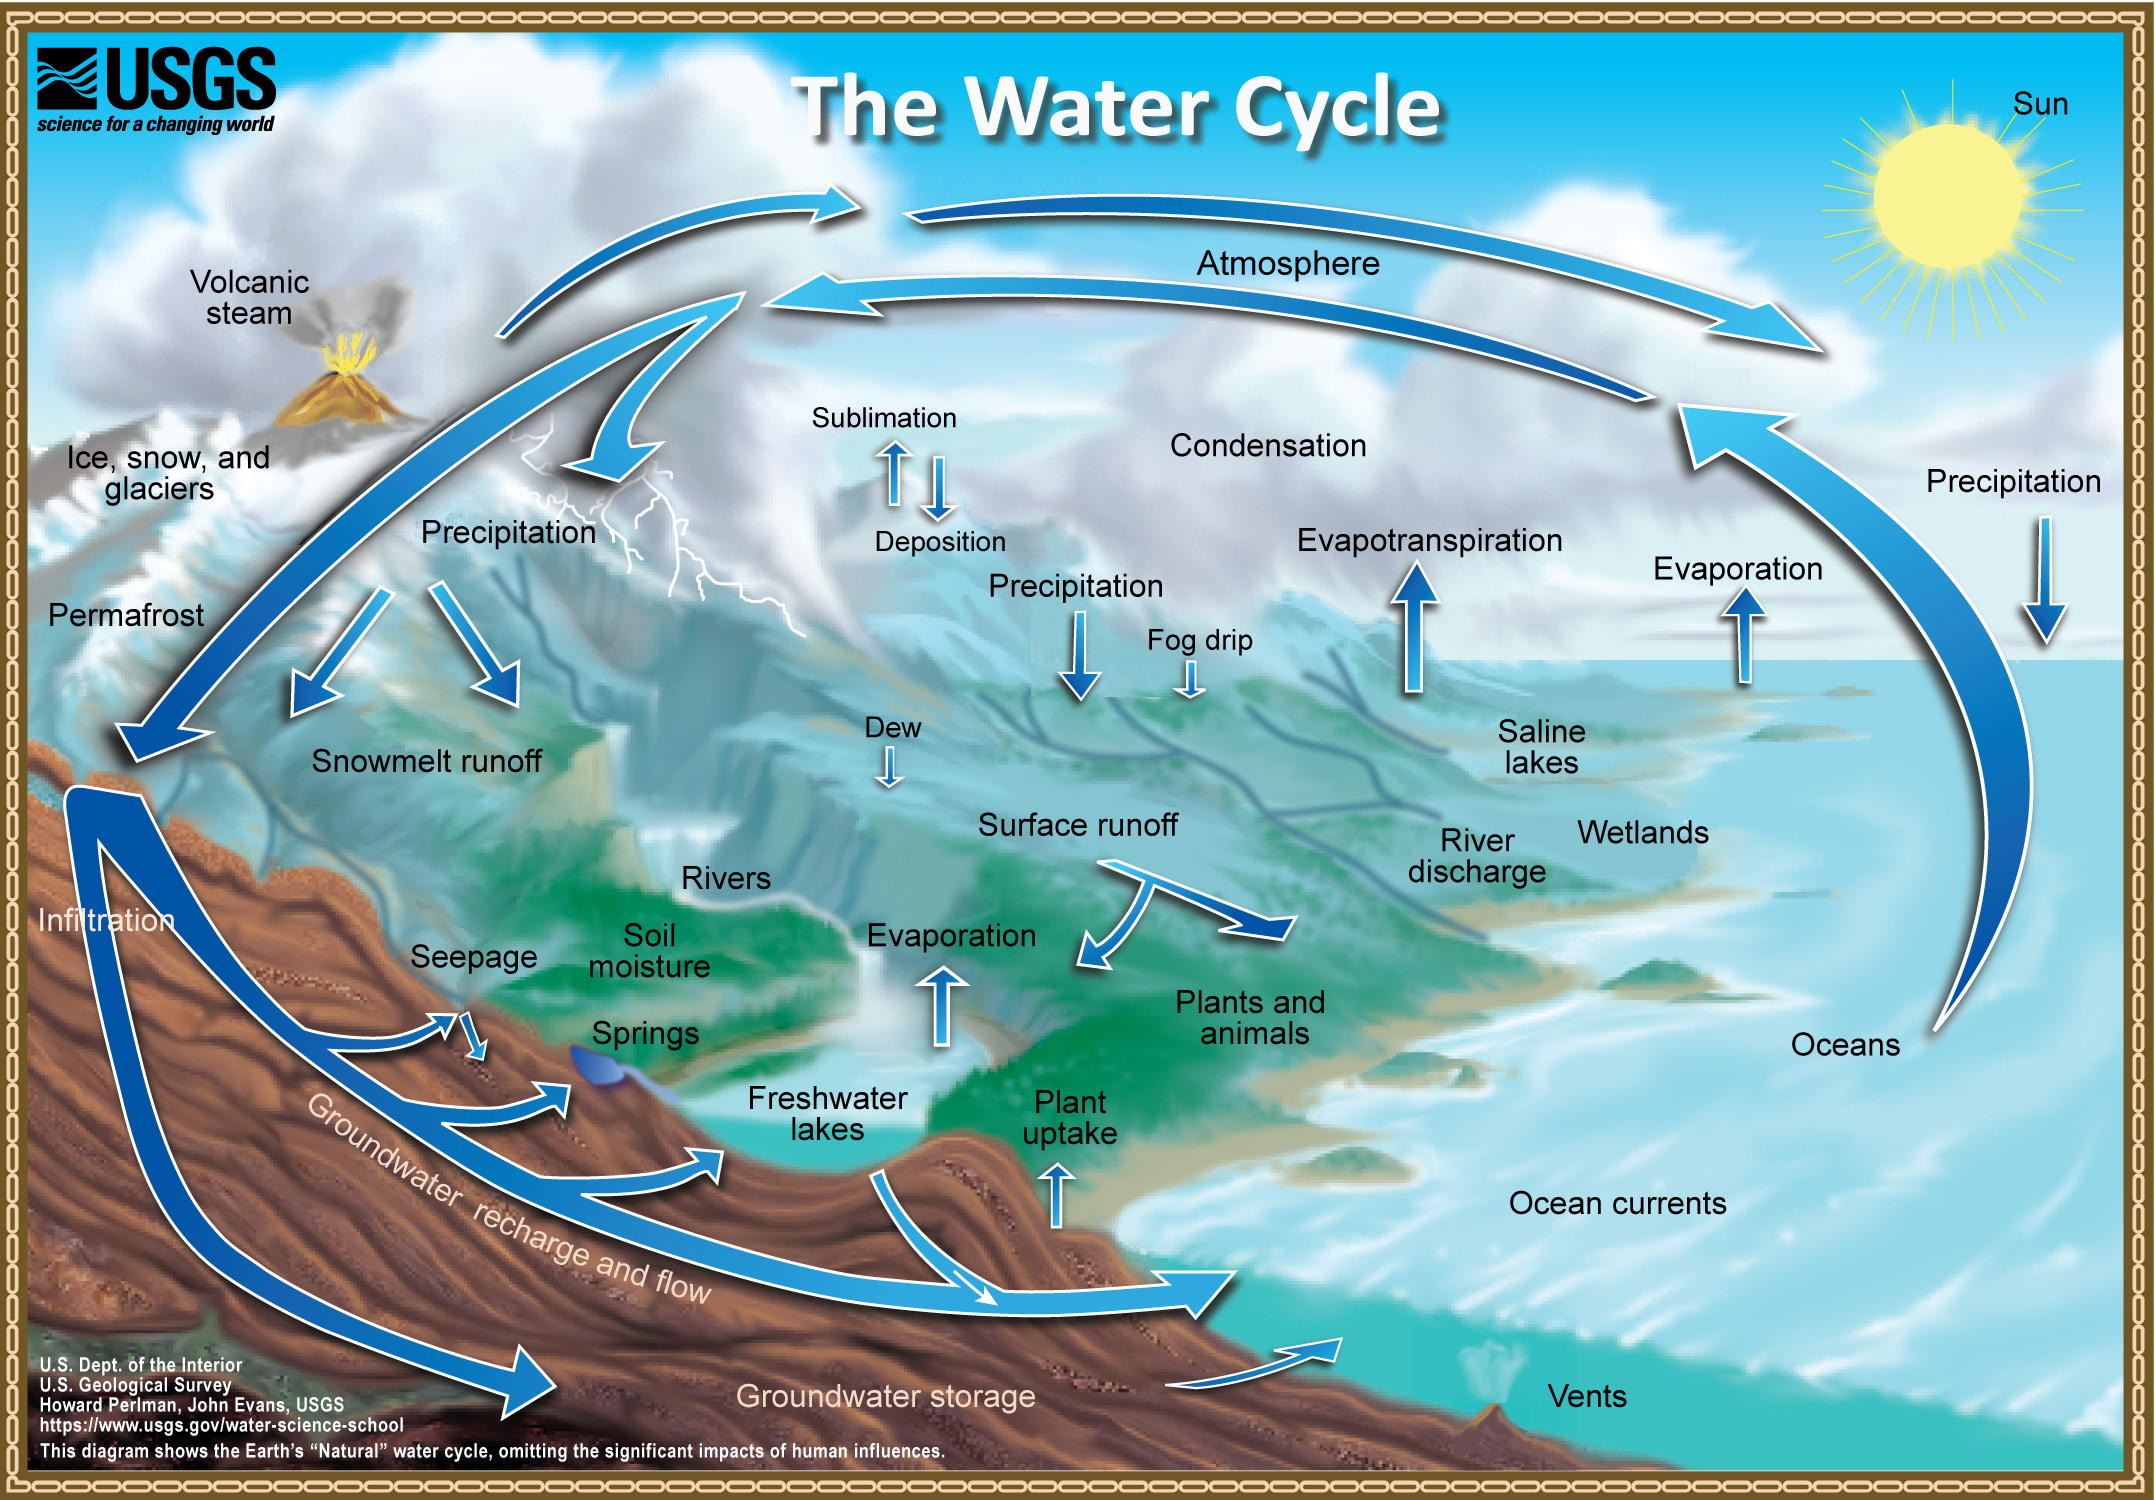 The illustration looks out over a landscape with an ocean and a large landmass. The front side of the landscape is cut away to show the subsurface. A big, sweeping circle of blue arrows depicts where water moves between places where is it stored. Smaller blue arrows show additional water movement processes.